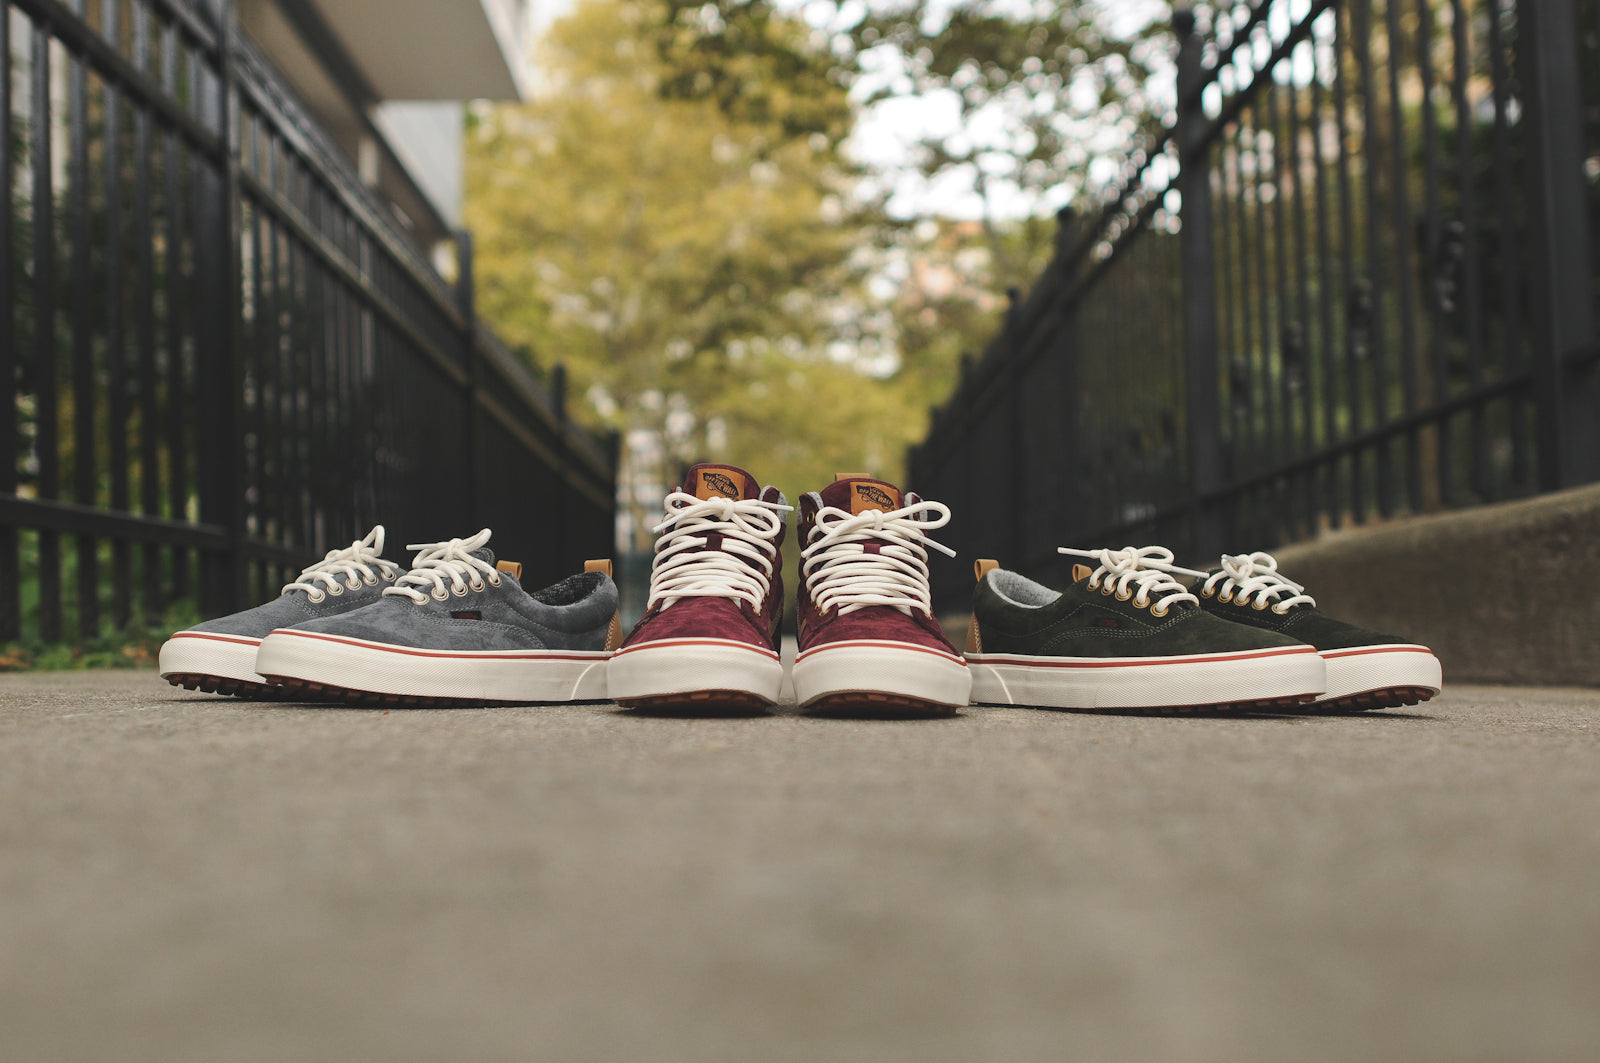 Vans Releases New MTE Collection